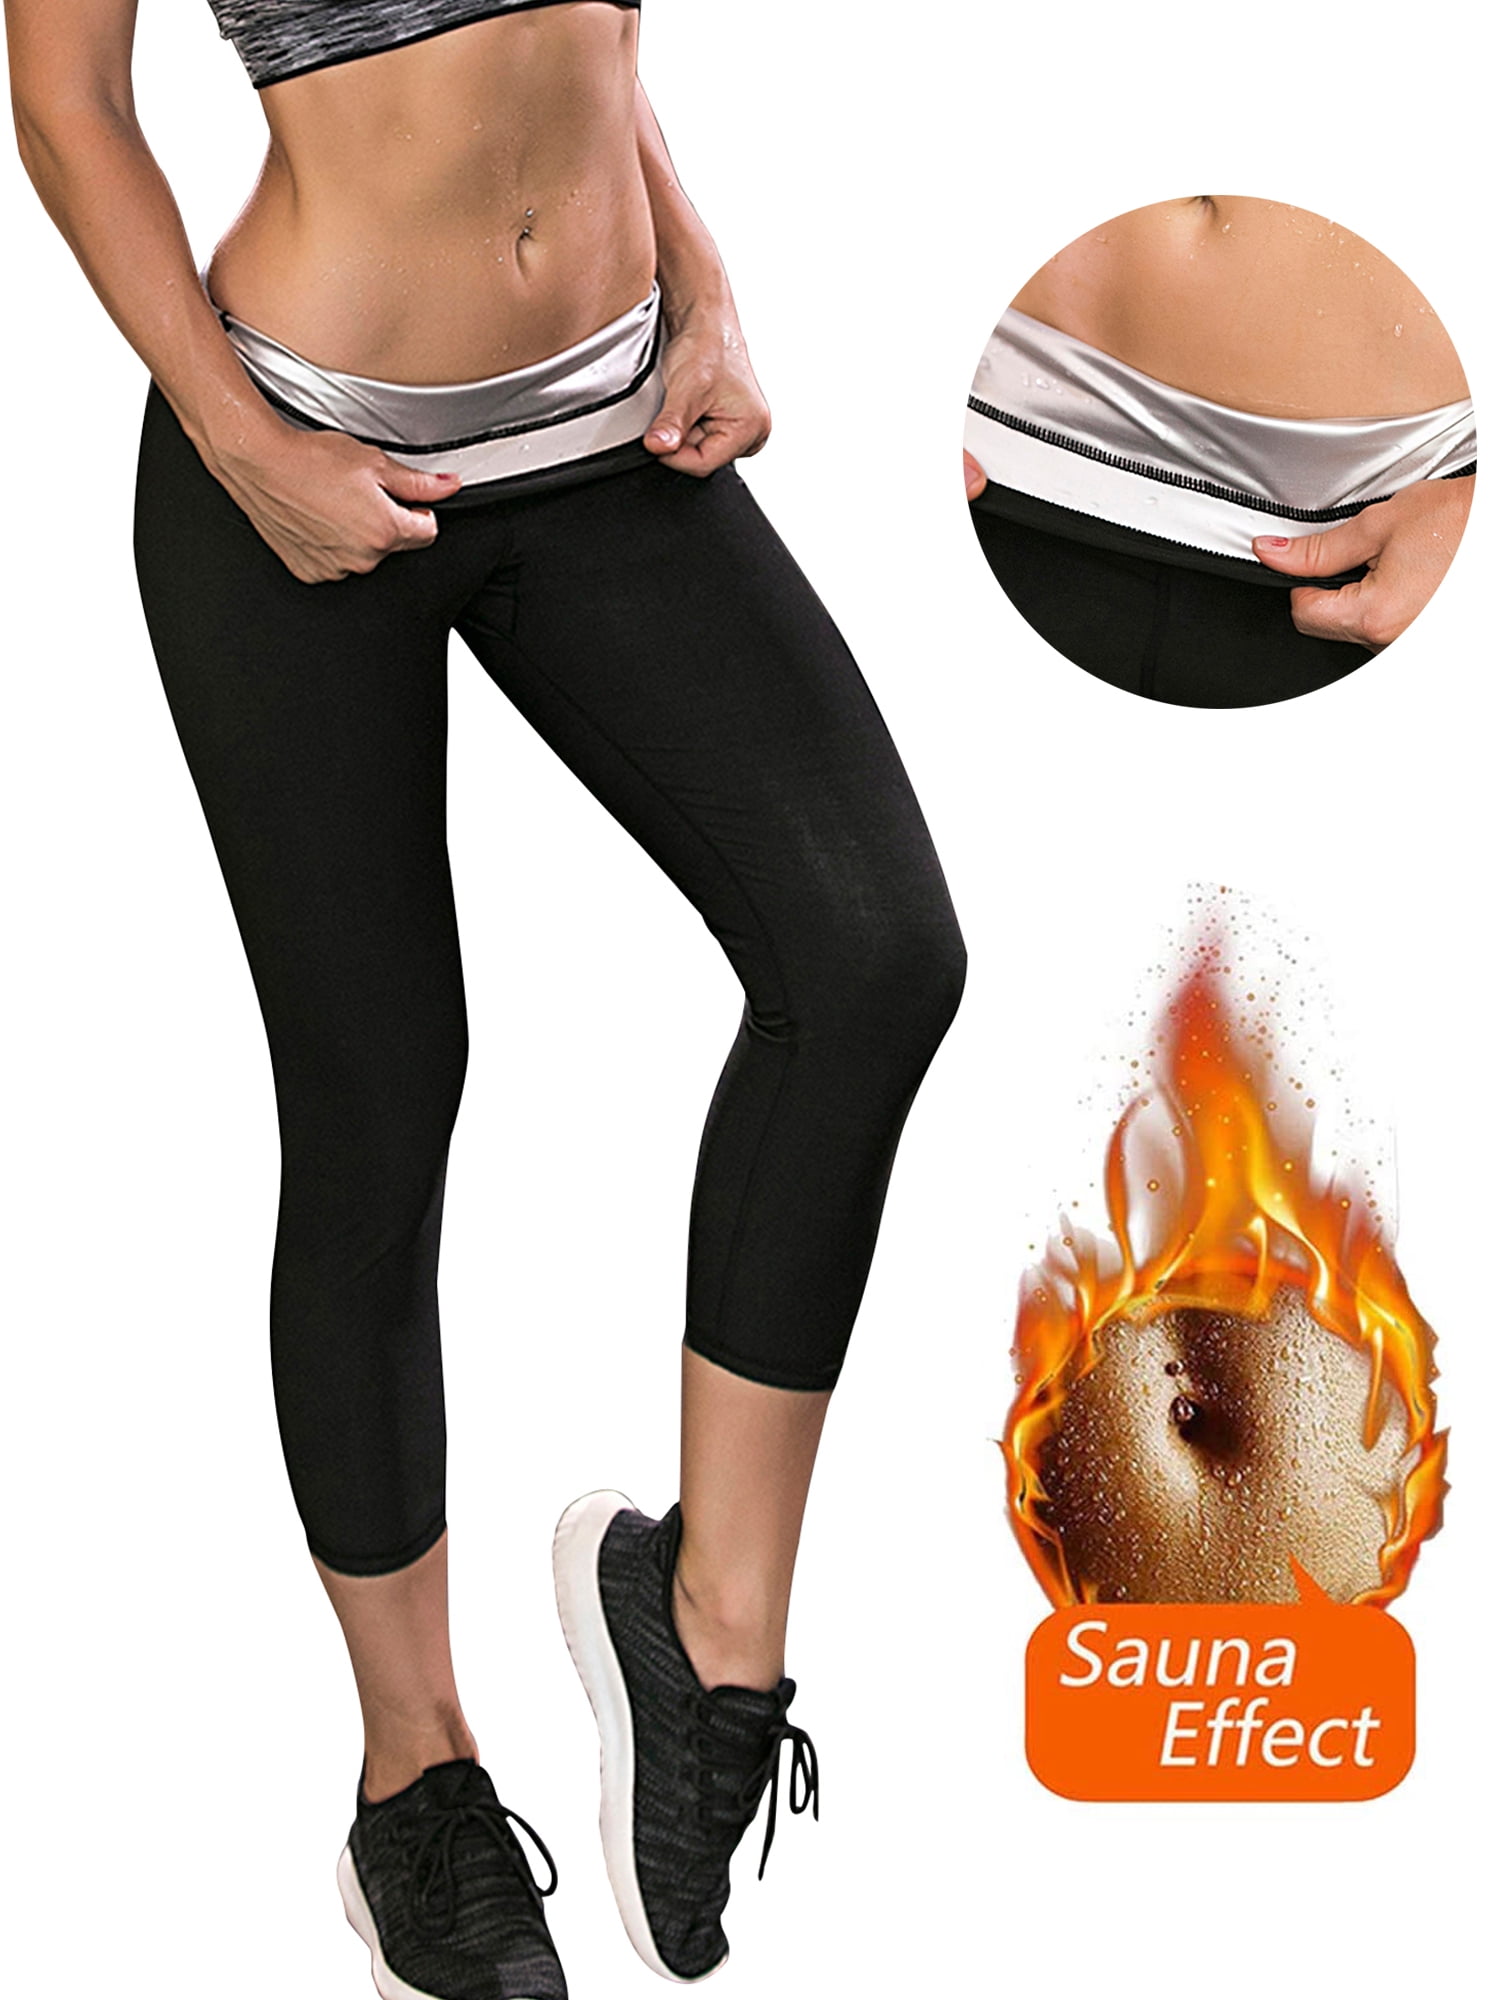 Women Sauna Shorts for Weight Loss Womens Slimming Pants Hot Neoprene for Pants Hot Thermo Sweat Leggings for Yoga Gym CyclingM 